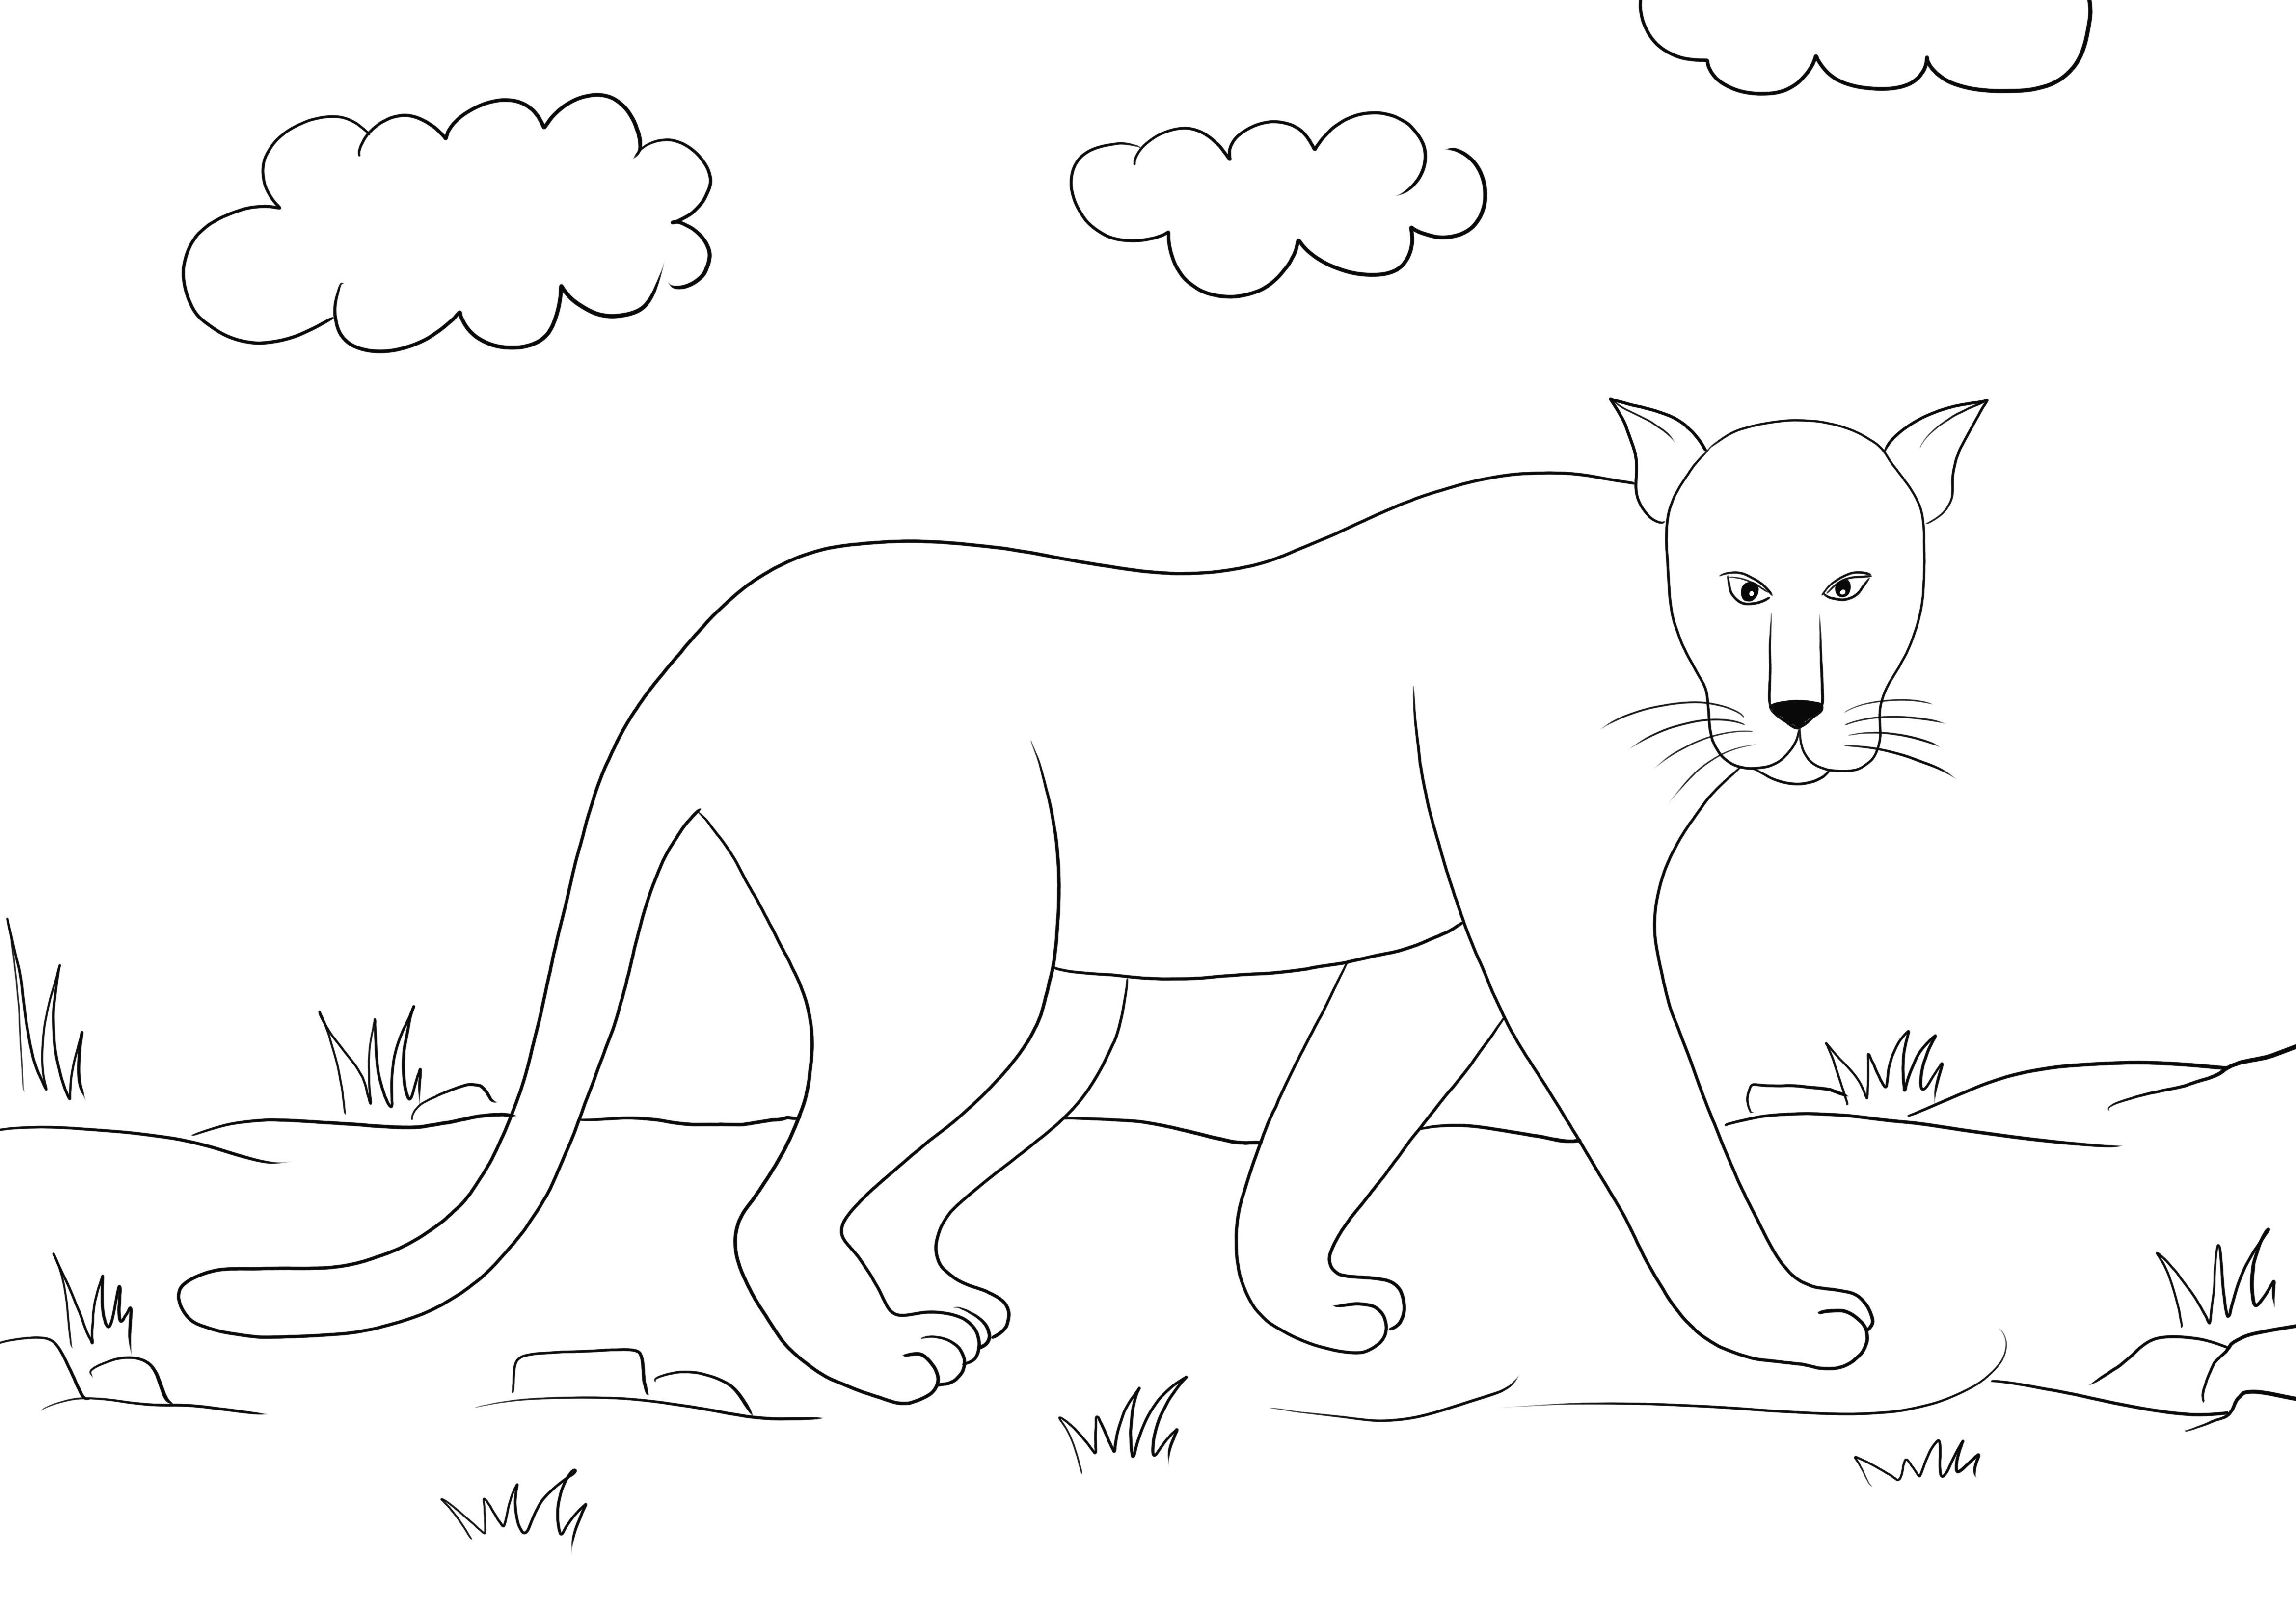 Free black and white Panther coloring image to download or print